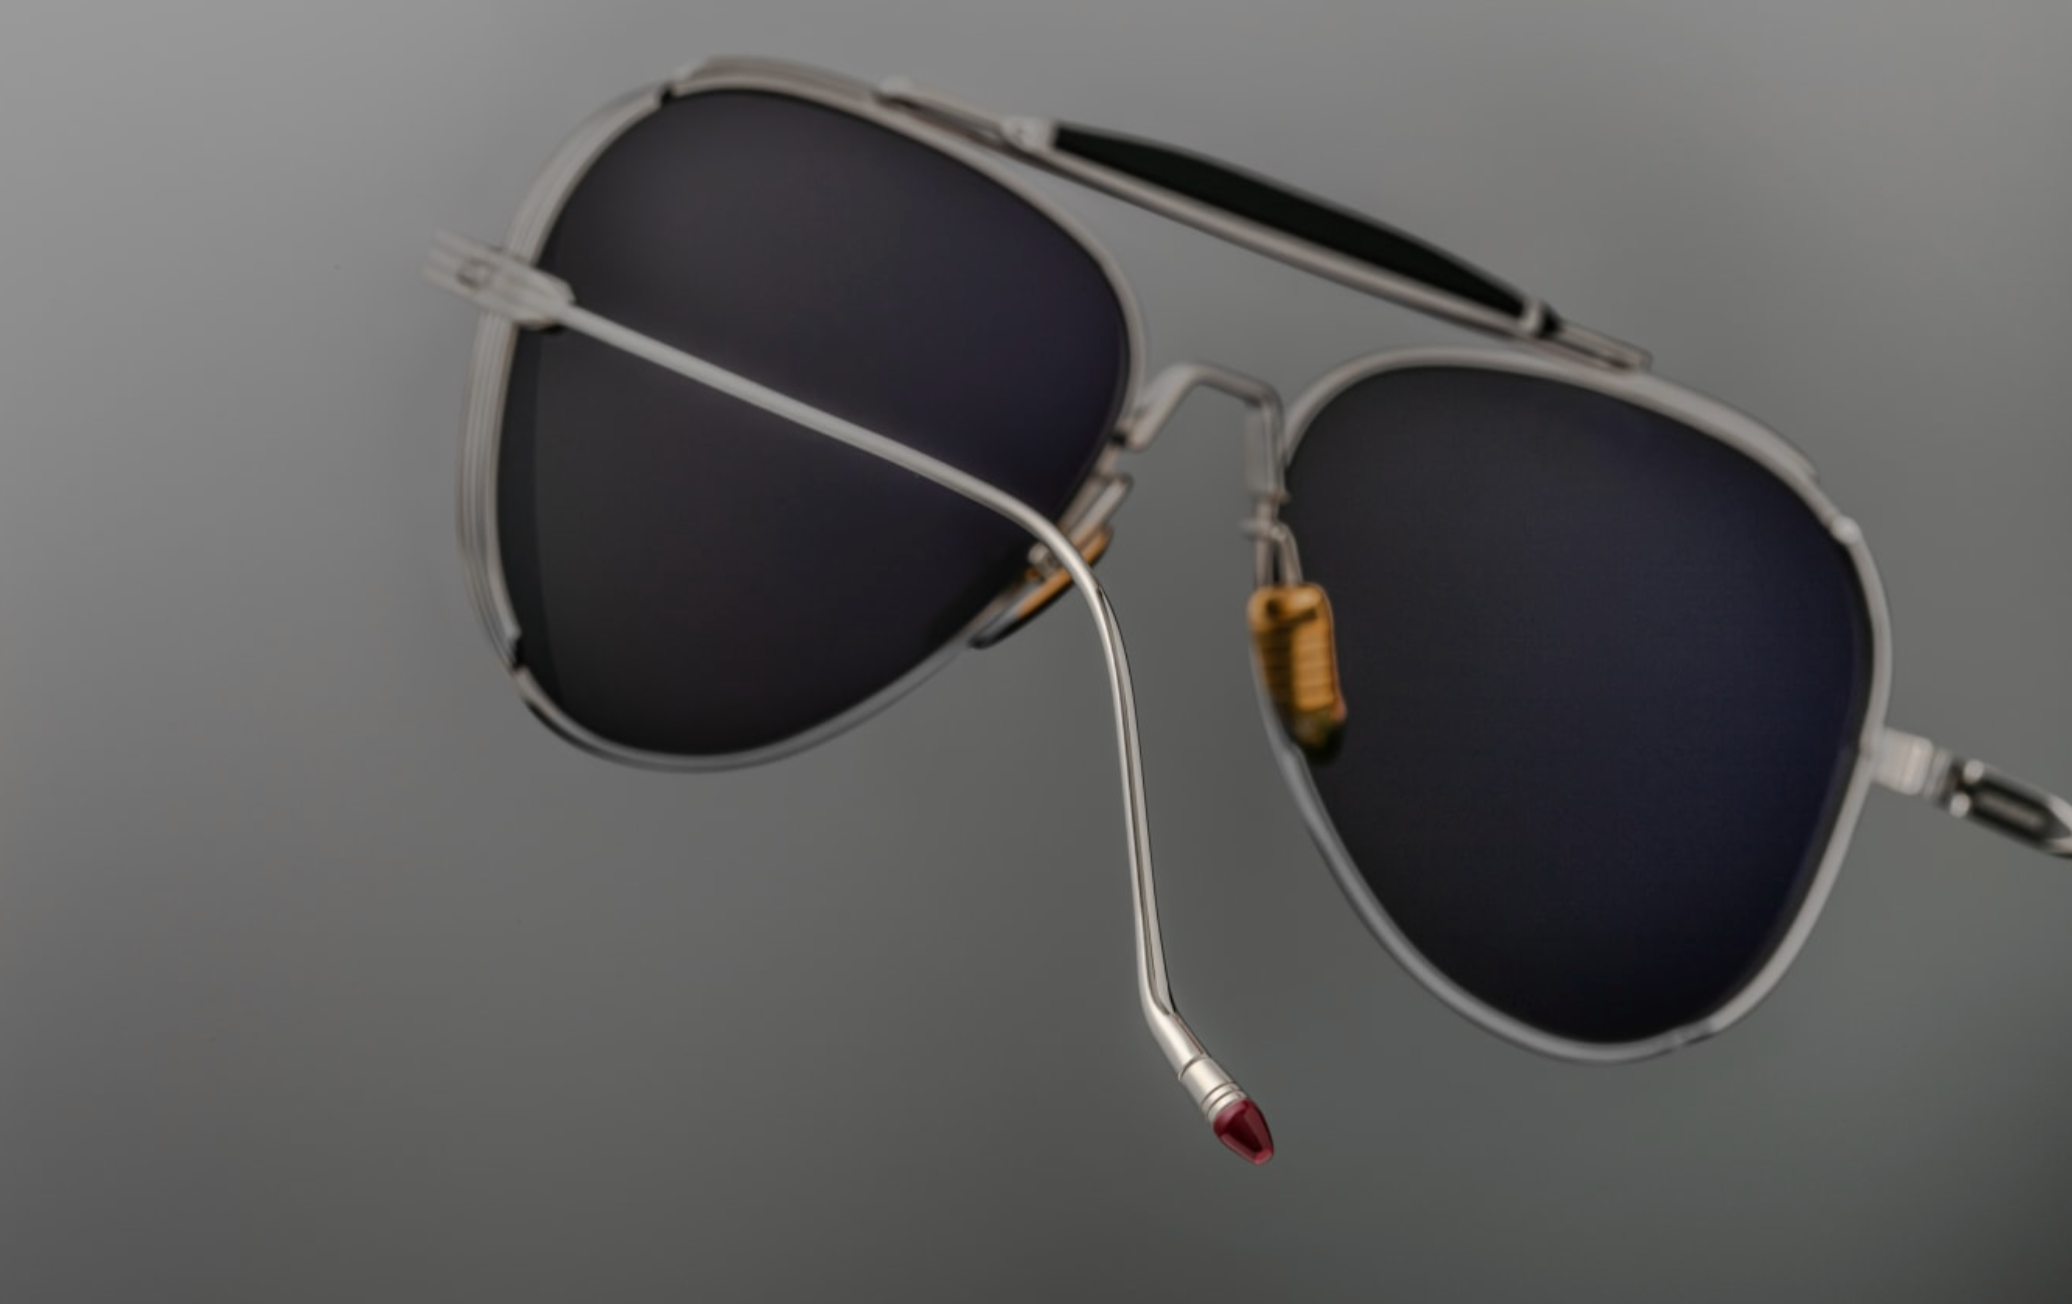 Jacques Marie Mage Gonzo Peyote 2 - Silver Fox | Sunglasses 